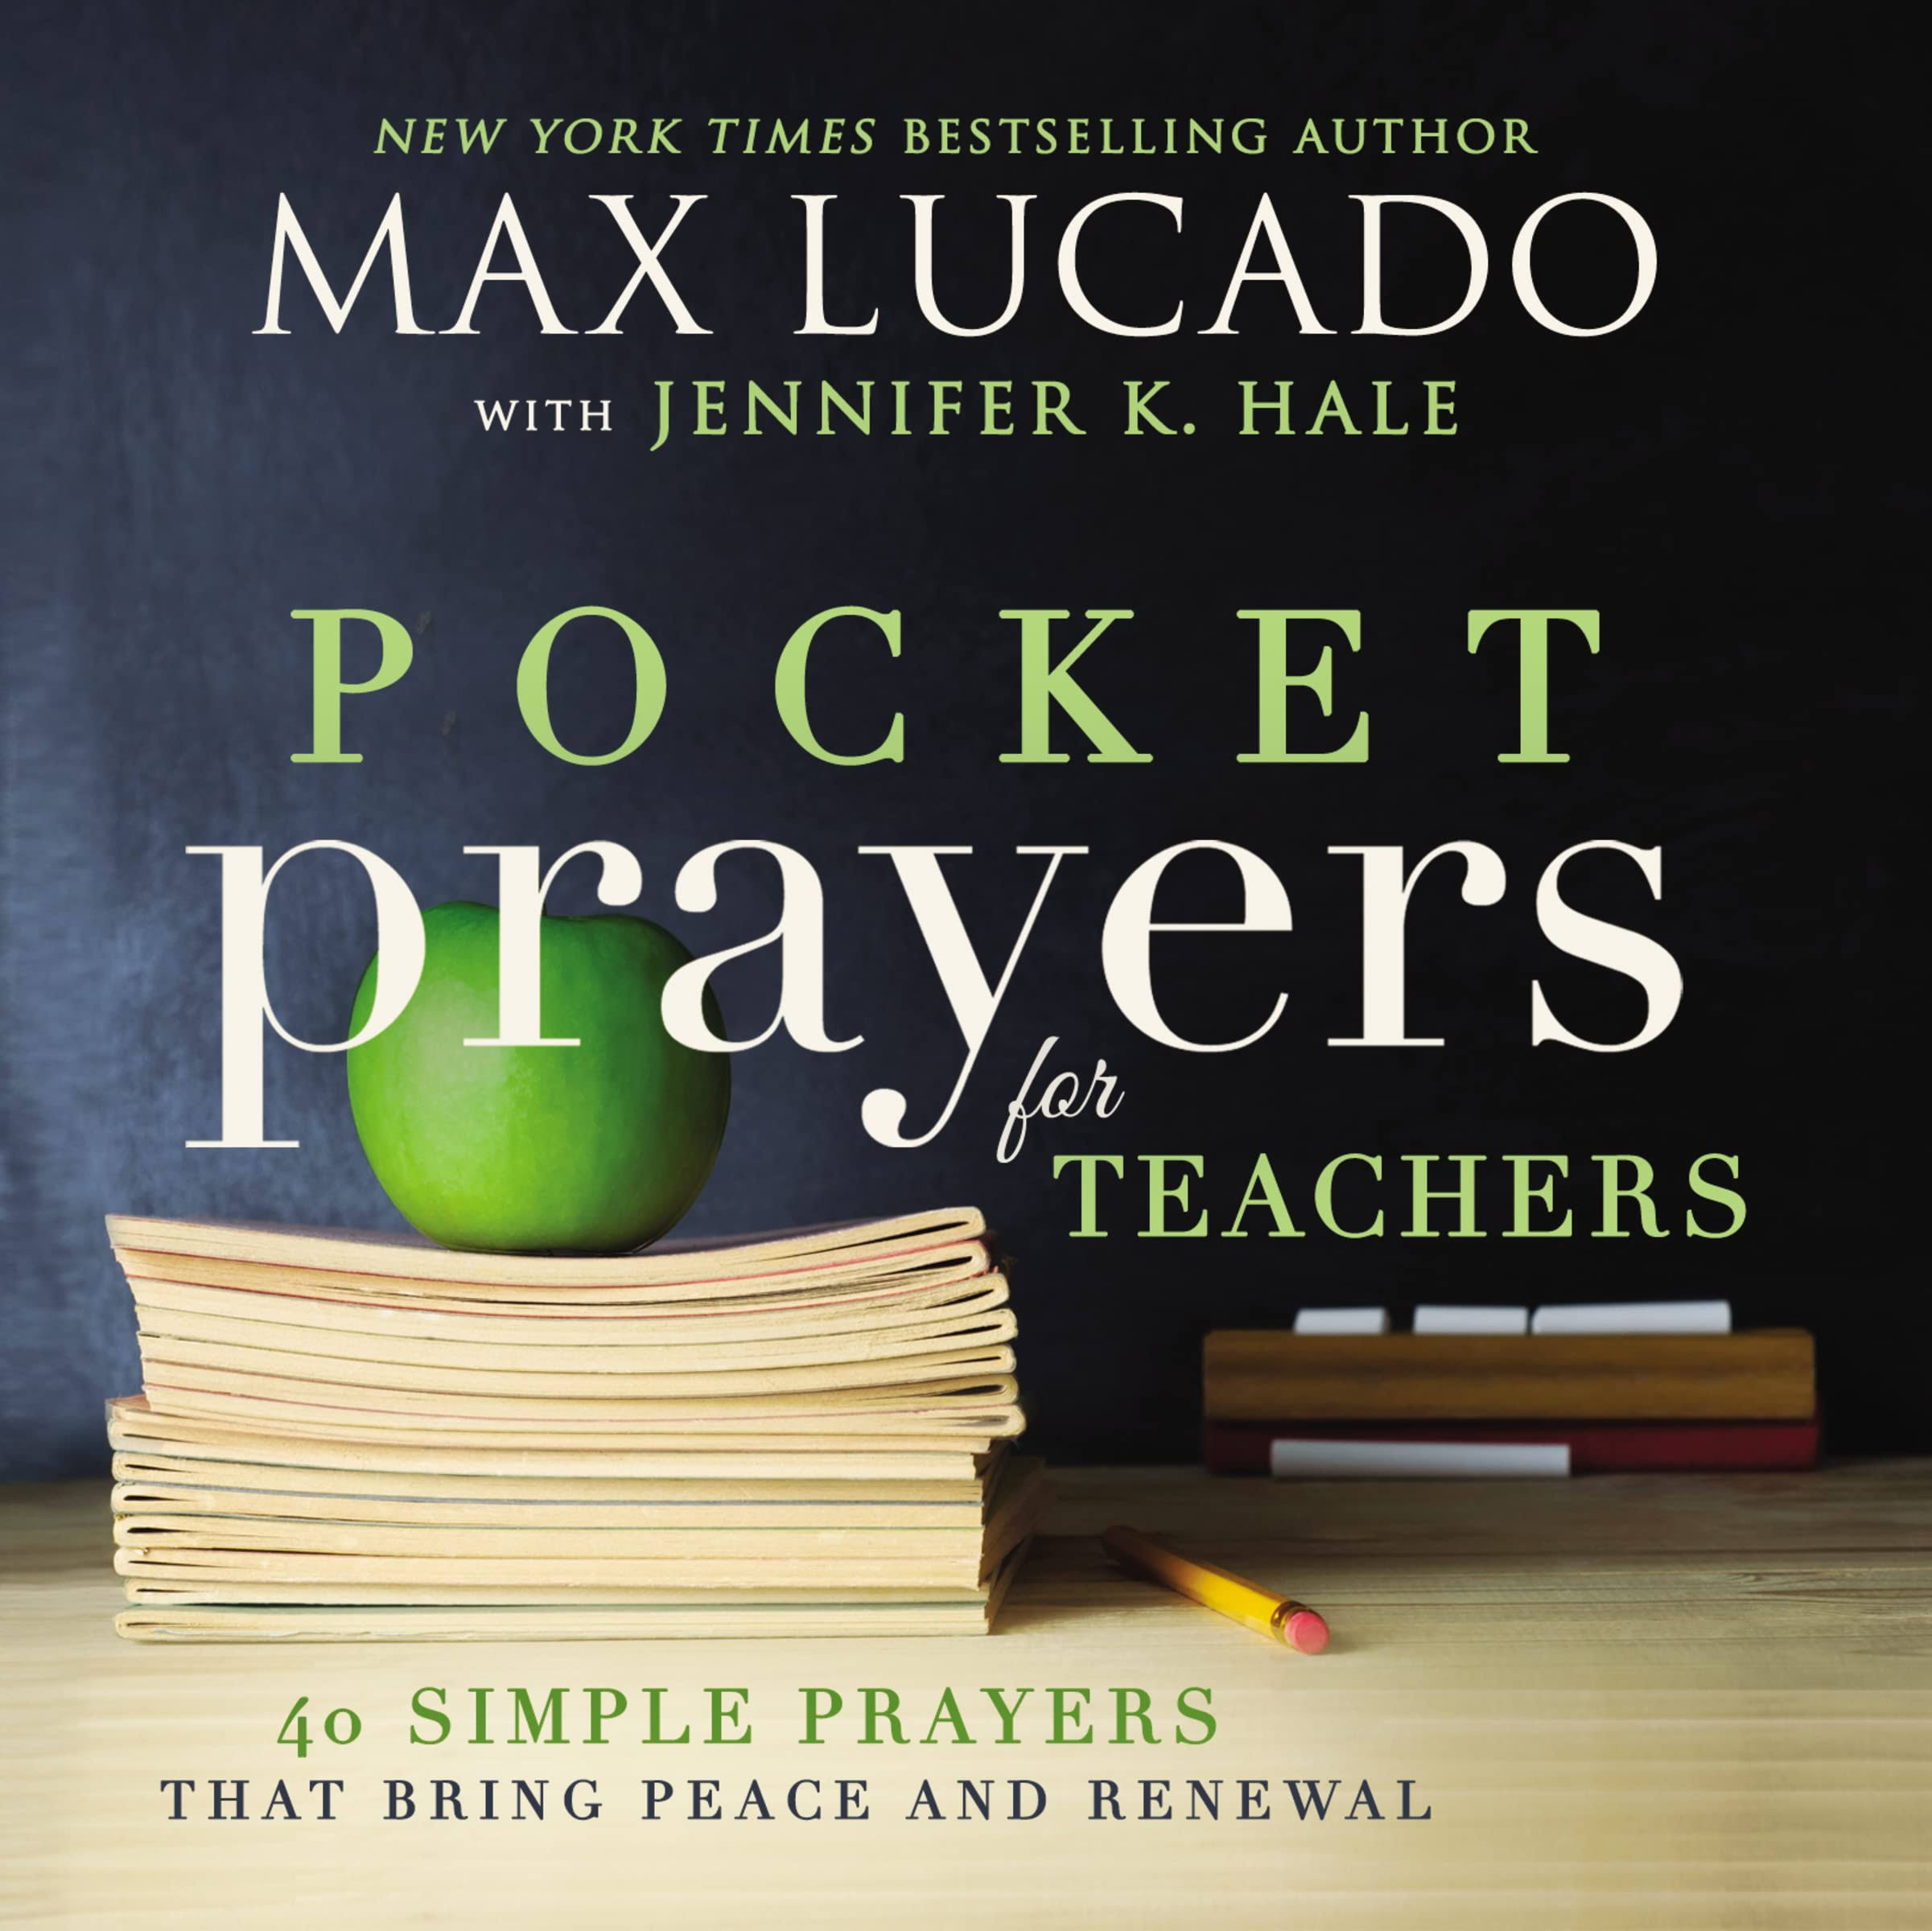 Pocket Prayers for Teachers: 40 Simple Prayers That Bring Peace and Renewal [Book]